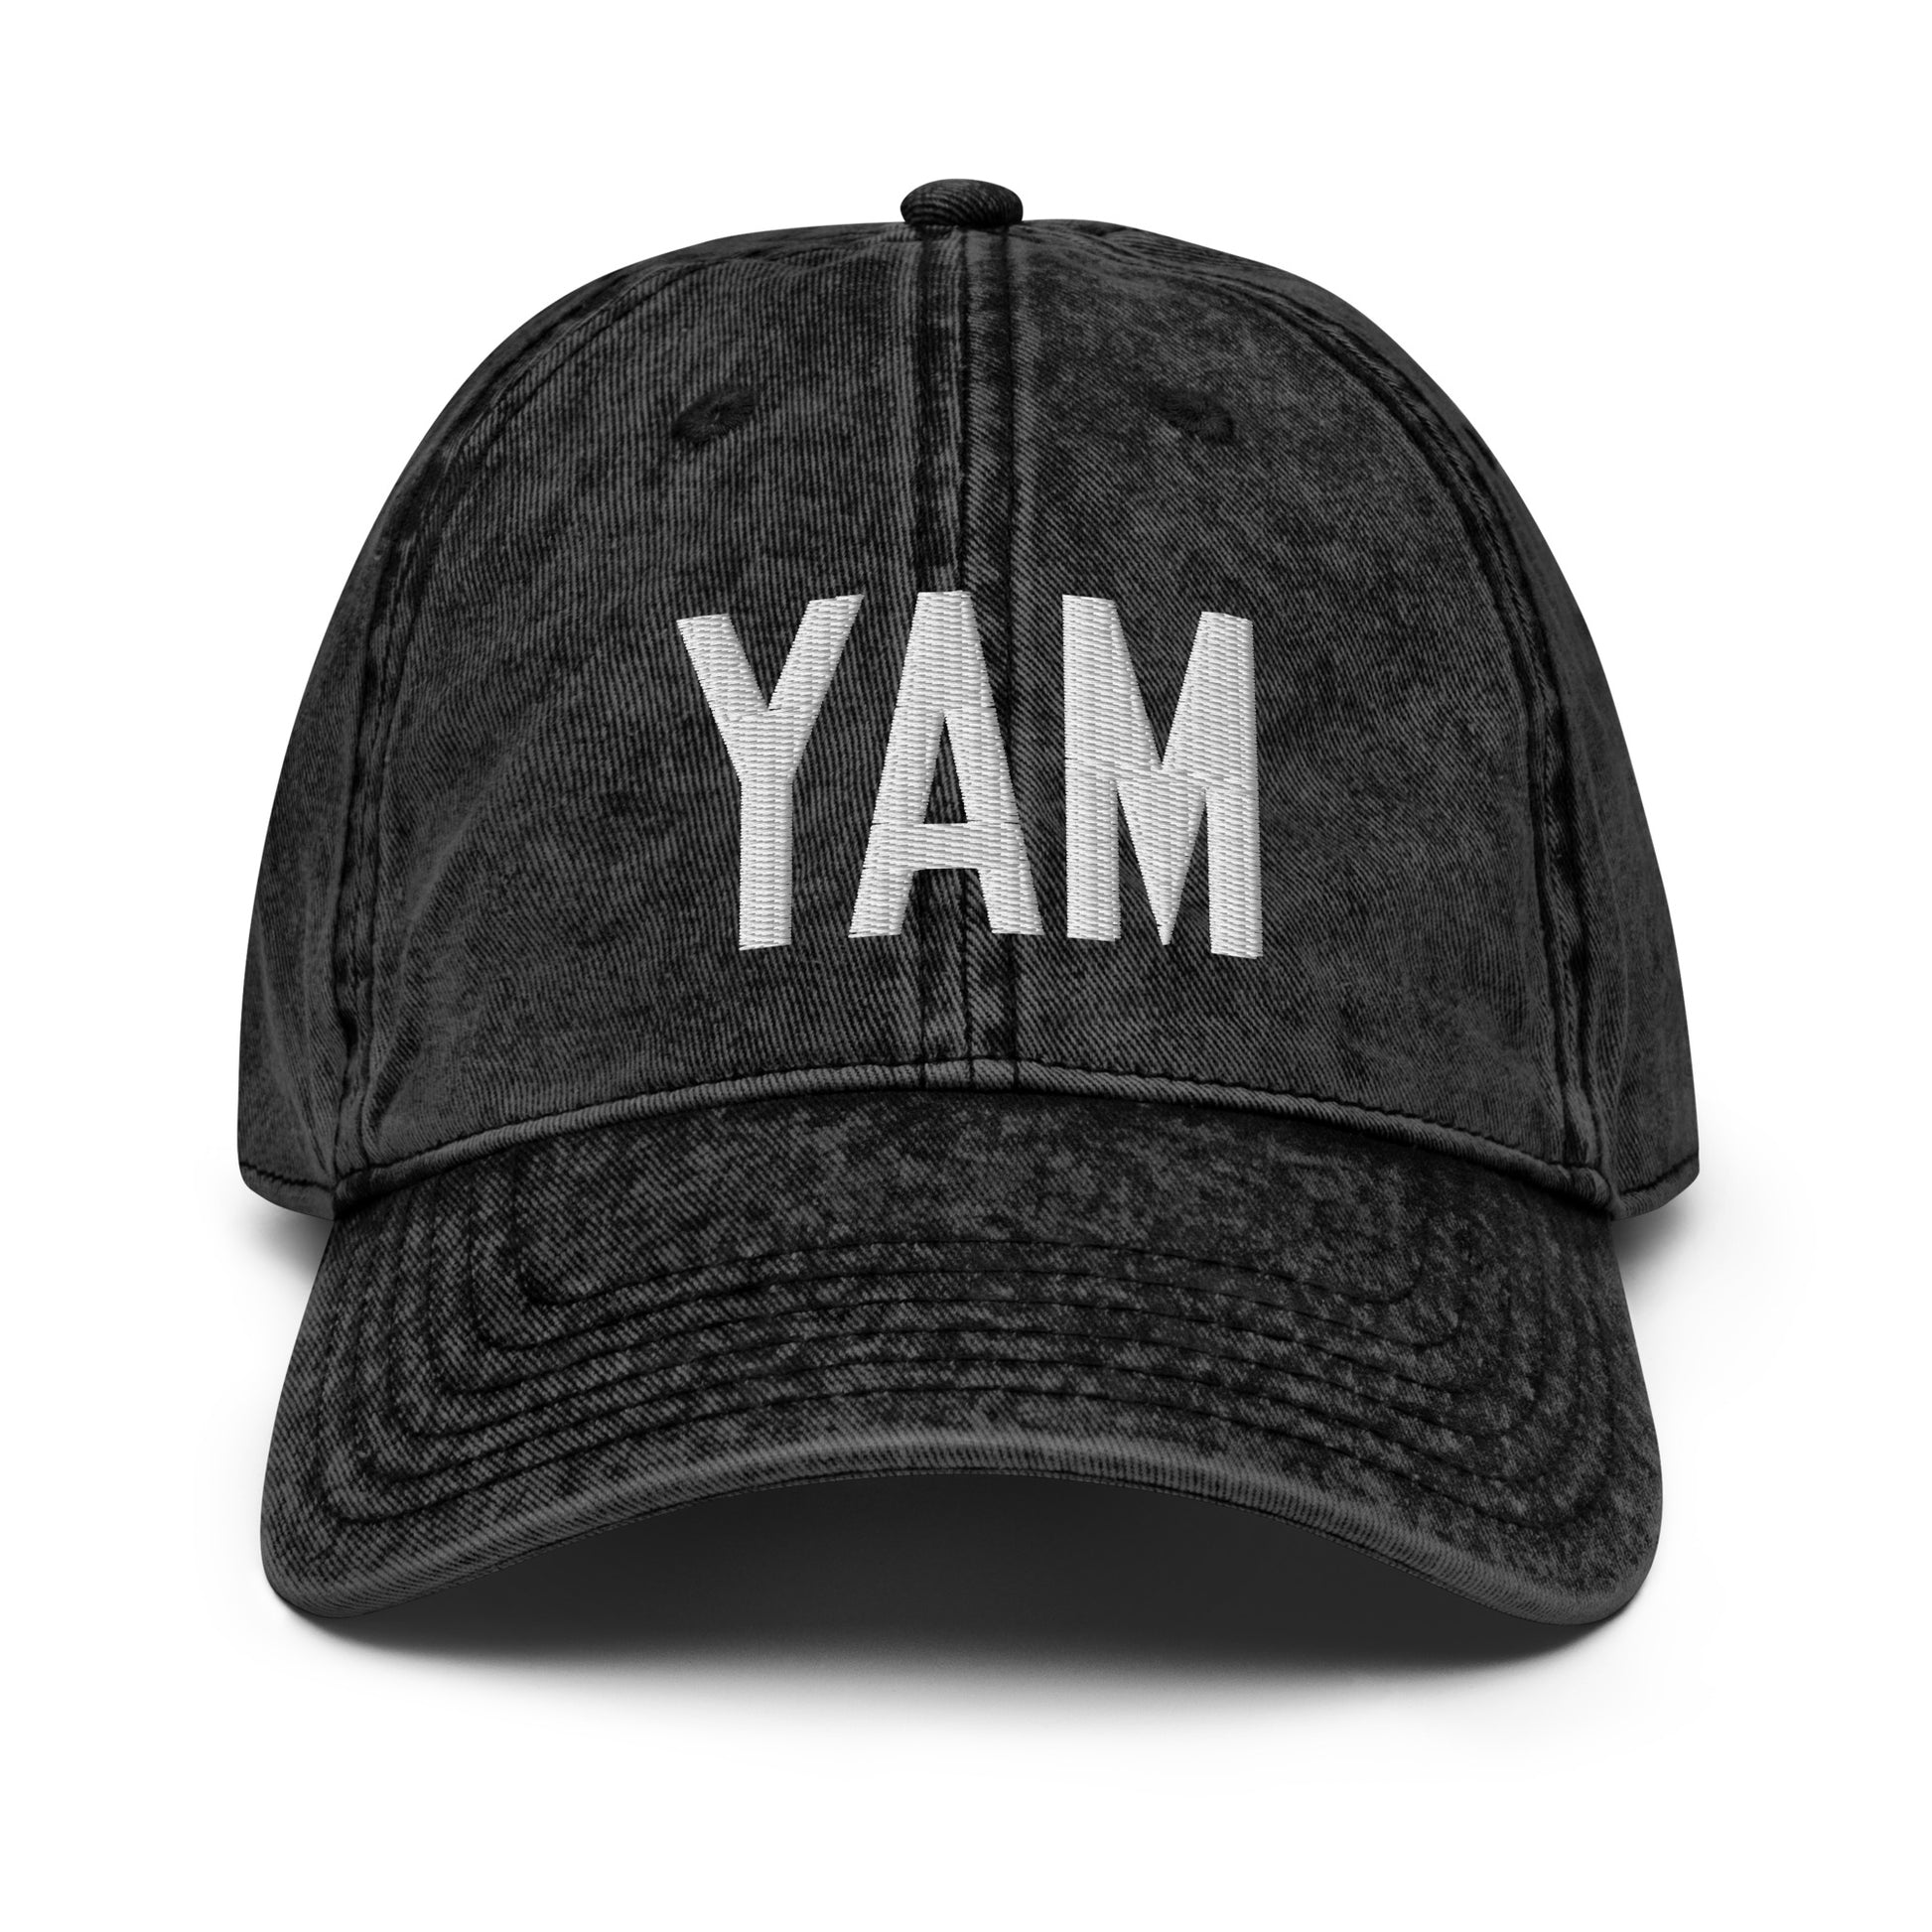 Airport Code Twill Cap - White • YAM Sault-Ste-Marie • YHM Designs - Image 14